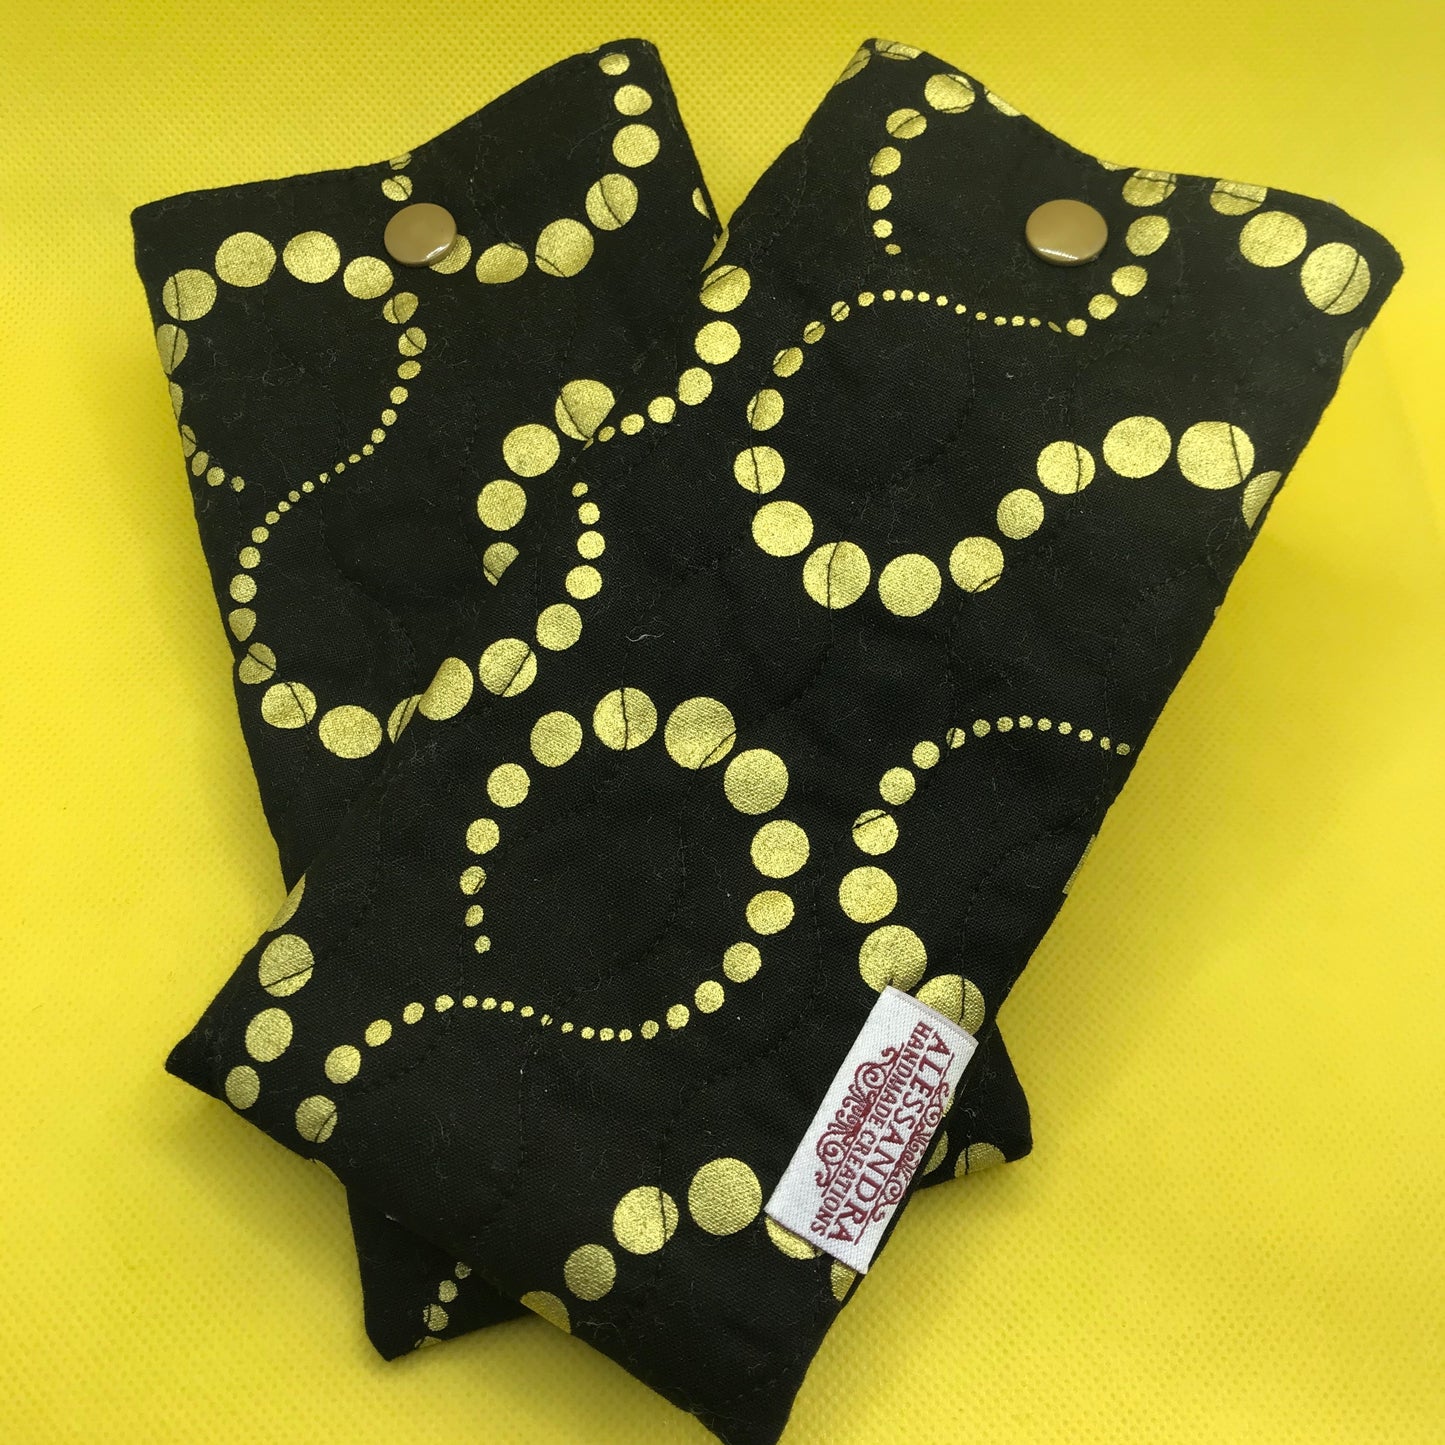 Sunglasses Quilted Fabric Pouch - Midnight Gold Orbits